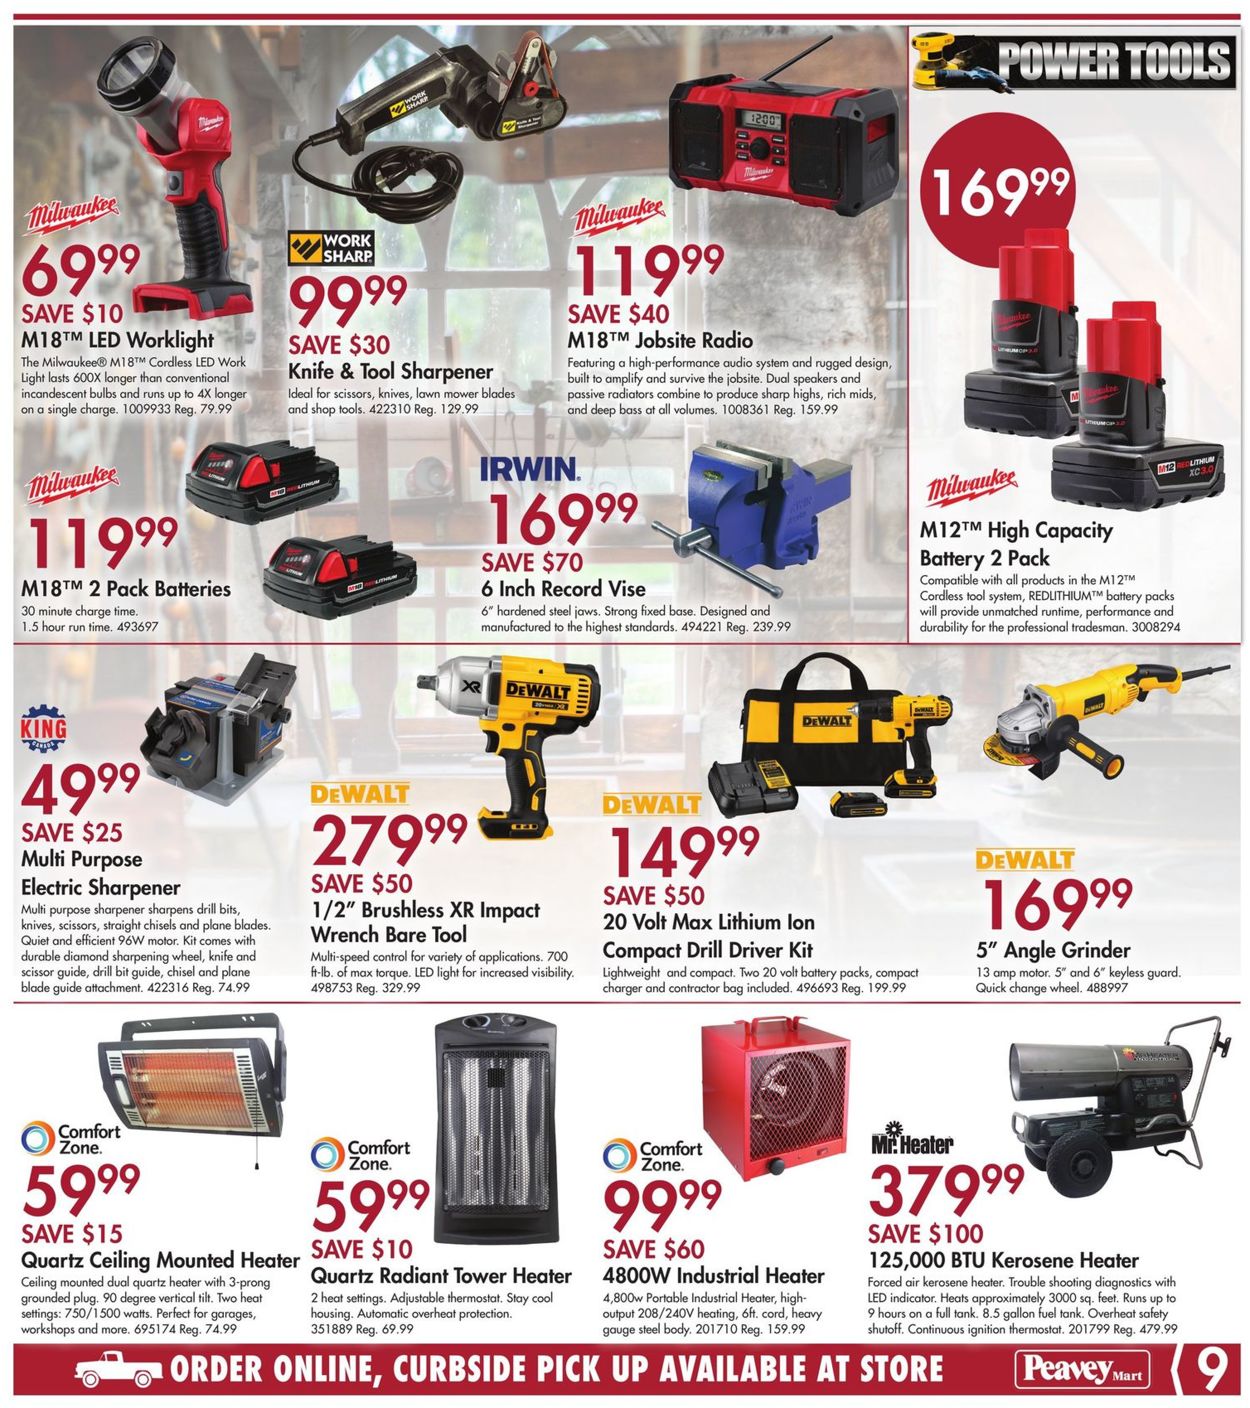 Peavey Mart Flyer from 11/12/2020